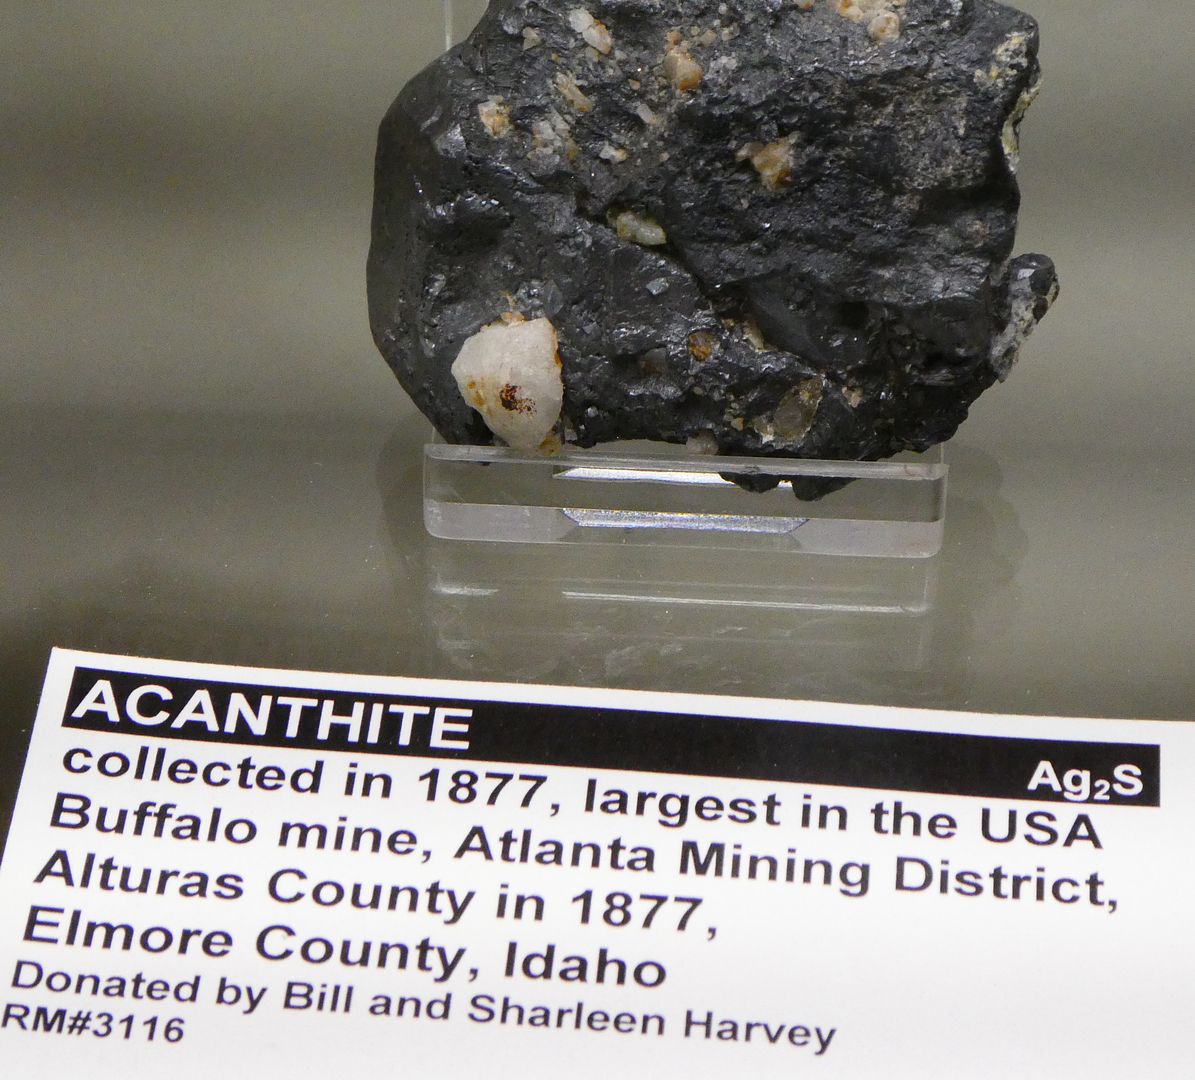 Northwest Mineral Gallery: Some Idaho Minerals (Photo Diary)